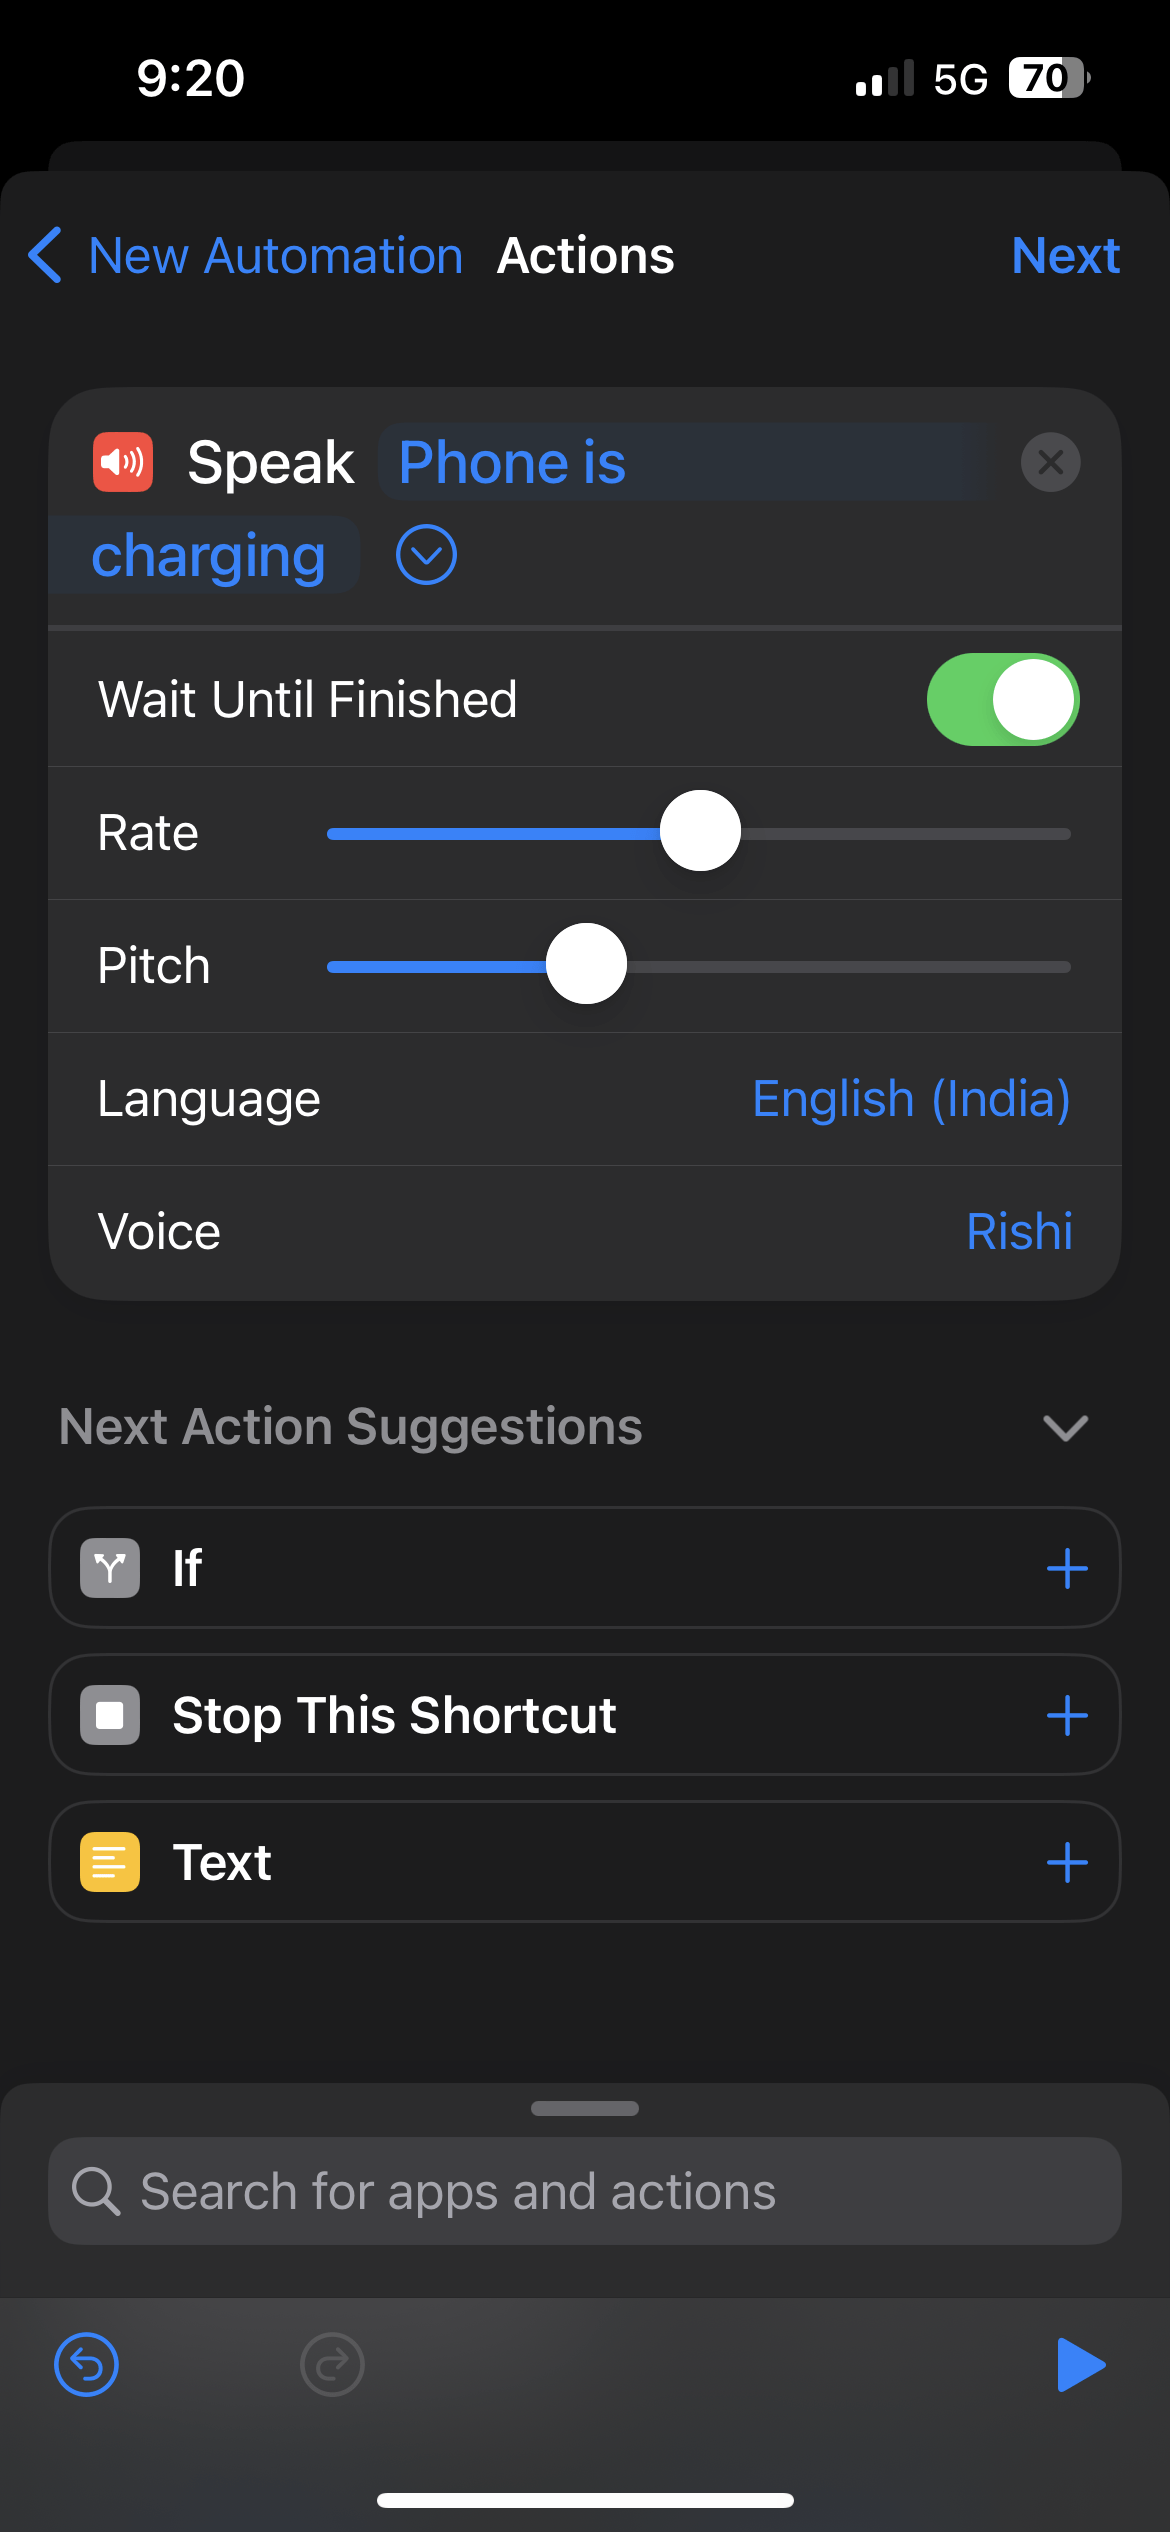 In the text field, enter the phrase that you want Siri to say when your iPhone is charging.